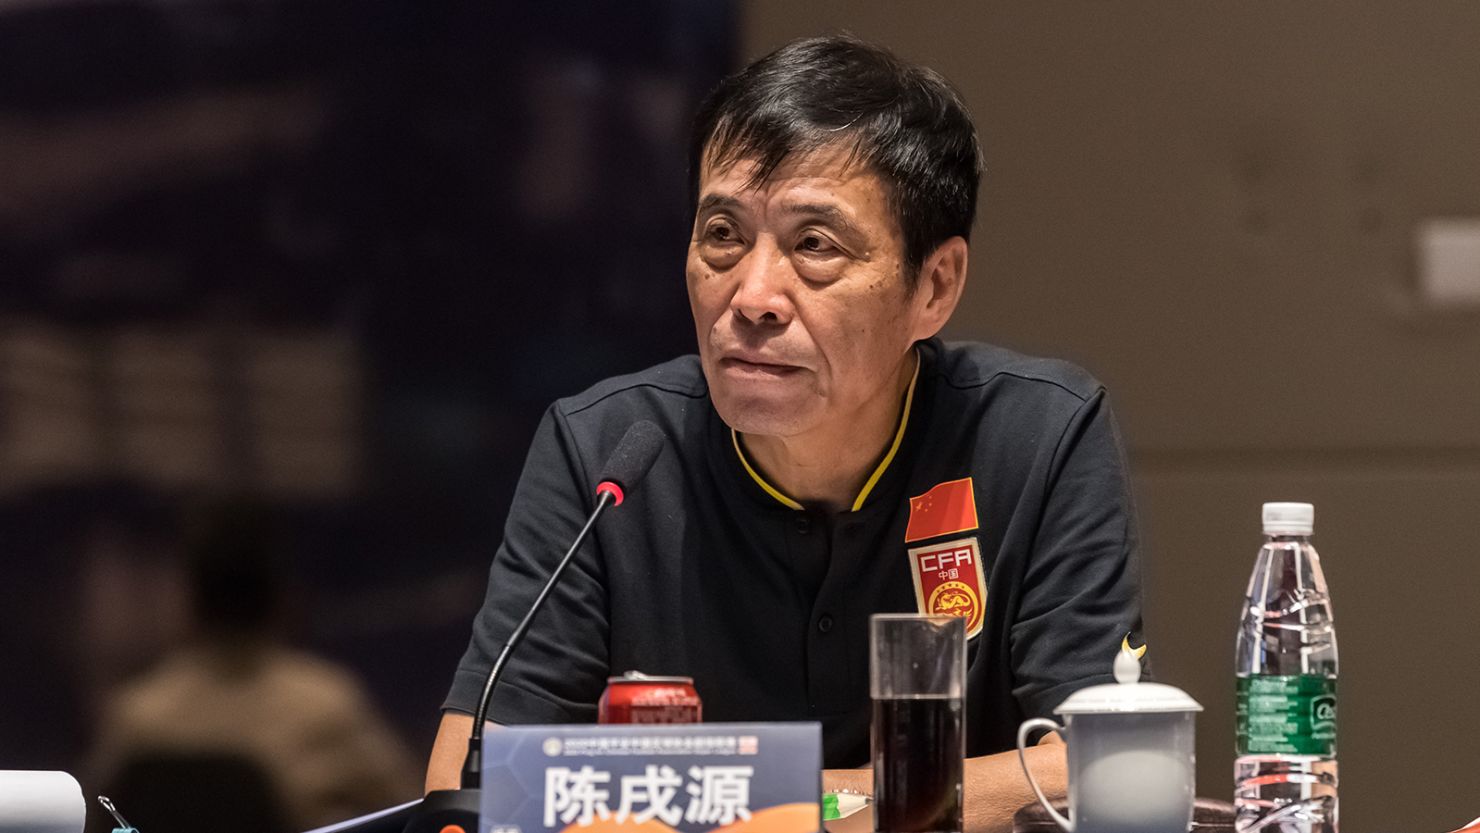 Chen Xuyuan, the president of the Chinese Football Association (CFA), delivers a speech during a soccer conference in China on September 2, 2020.